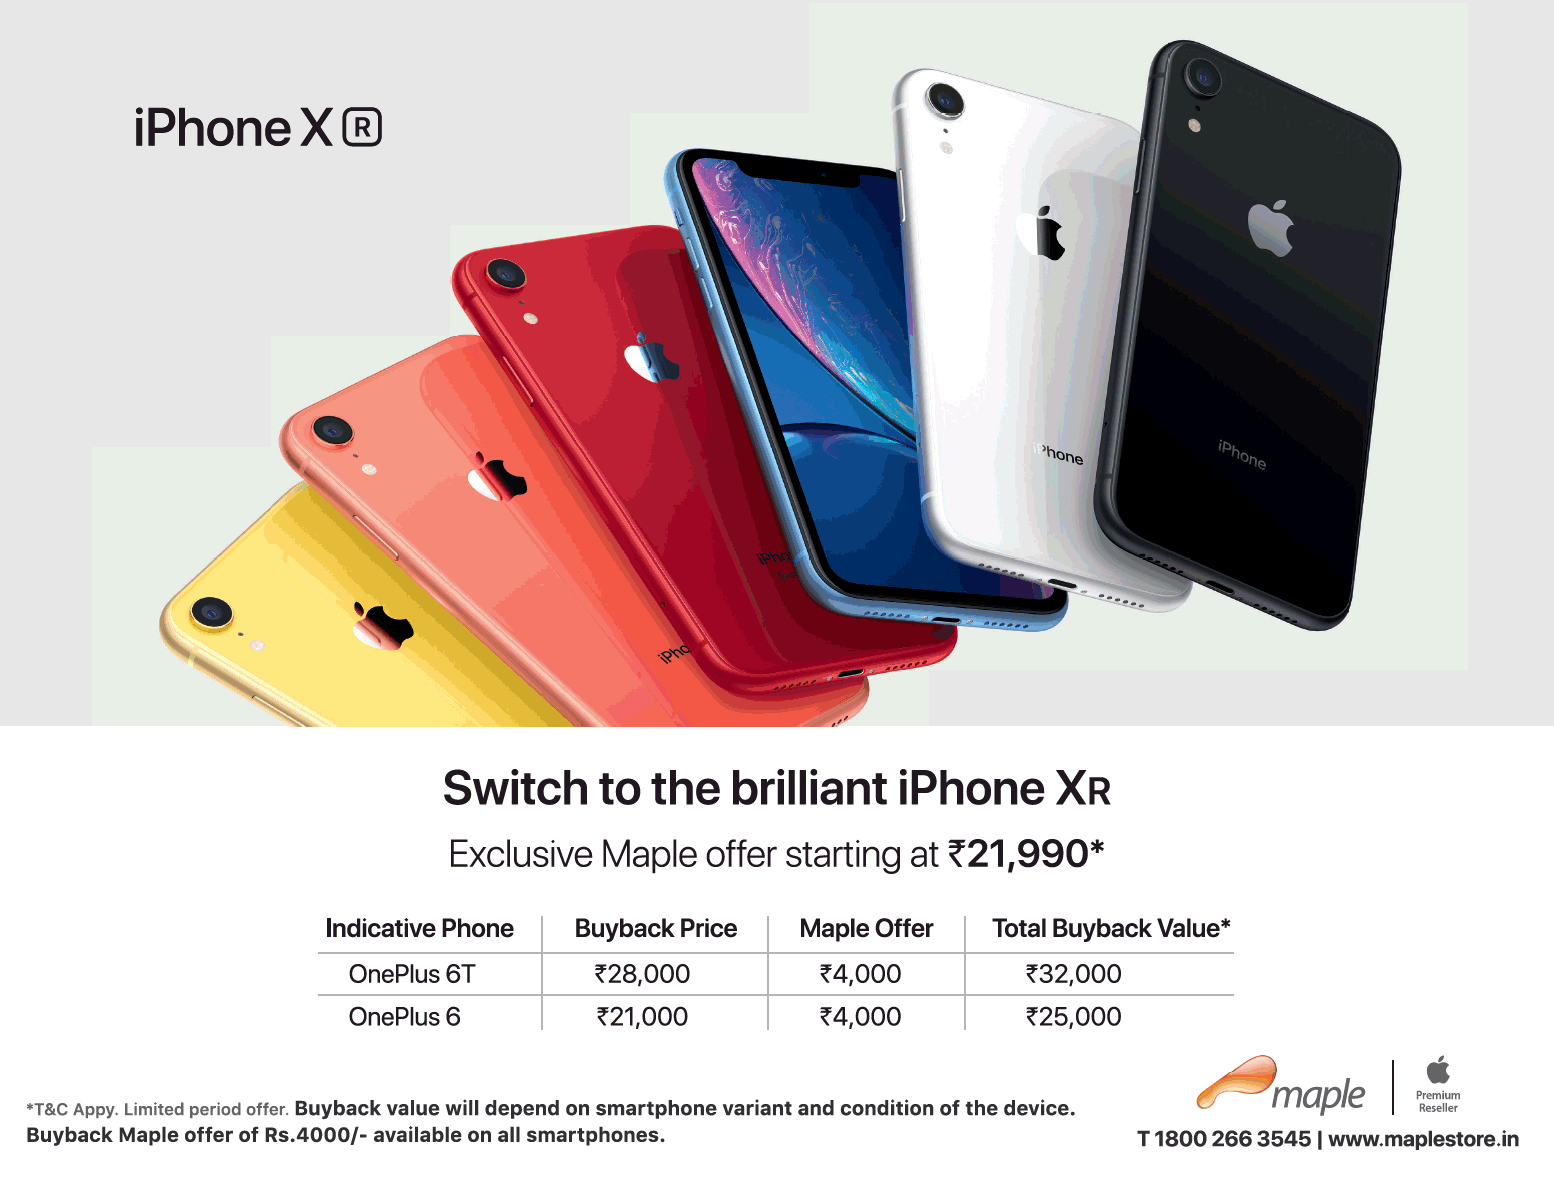 maple-apple-premium-reseller-i-phone-x-r-ad-bombay-times-11-05-2019.png